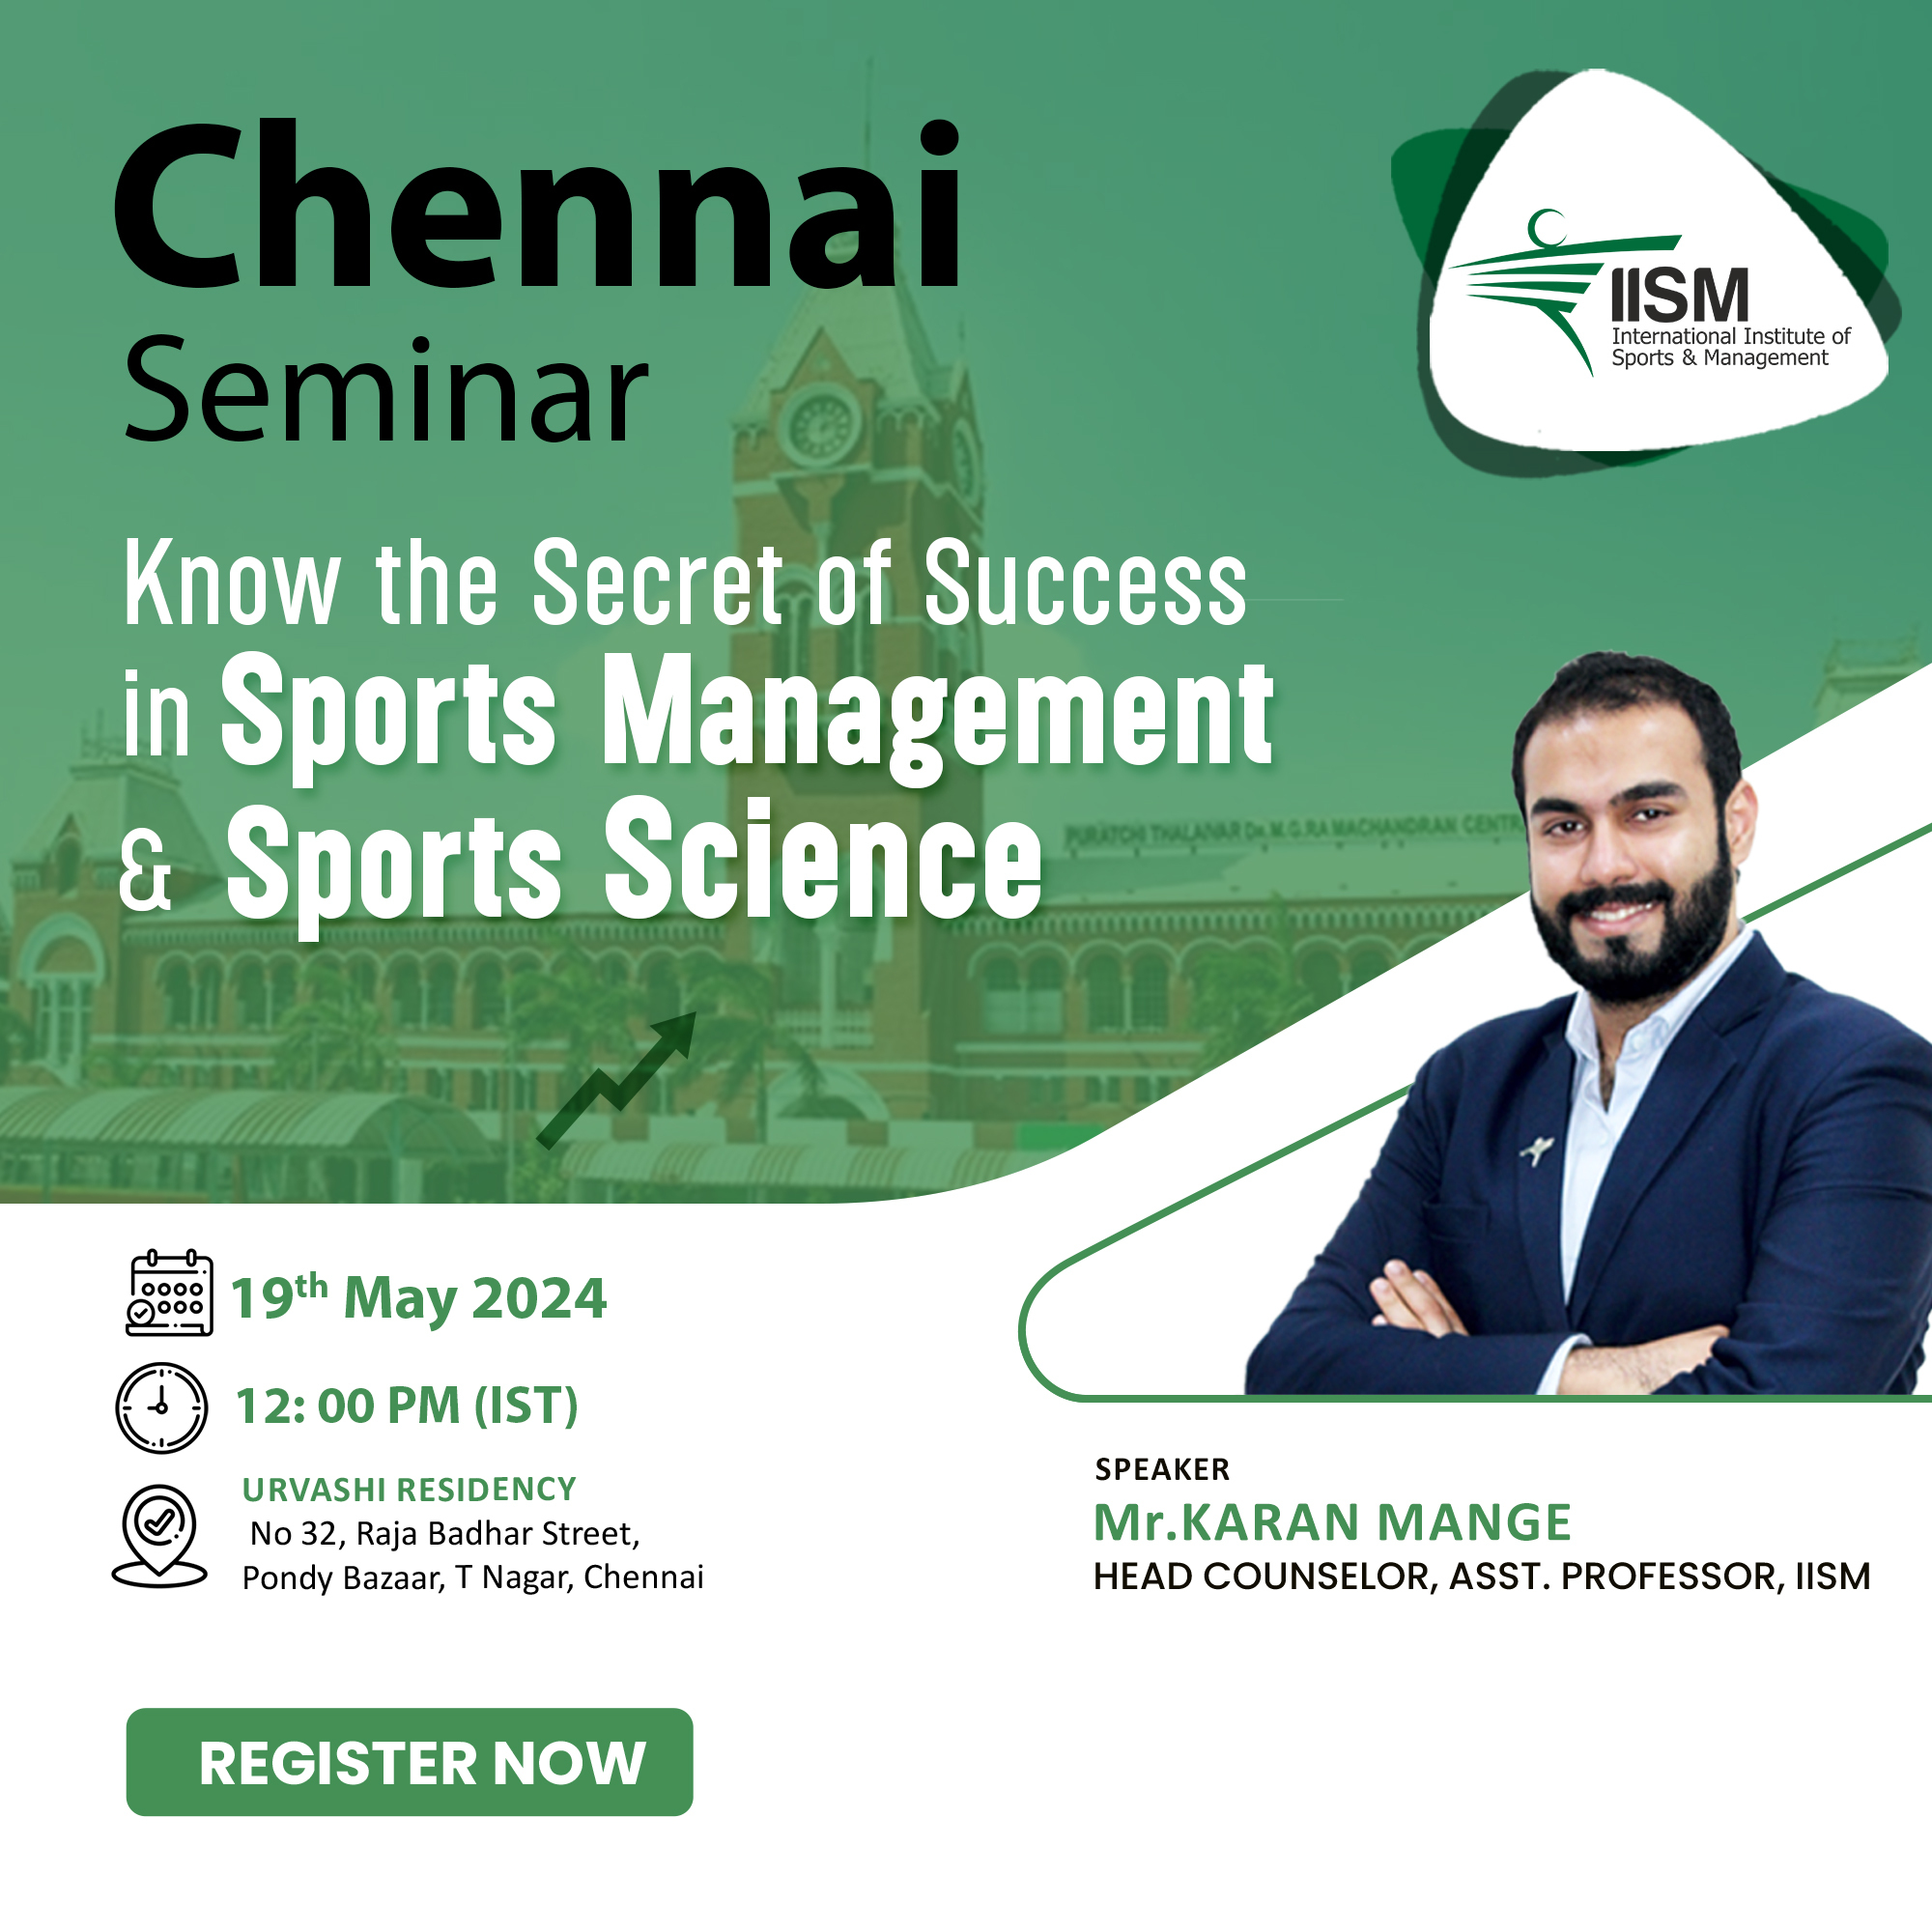 Know the Secret of Success in Sports Management & Sports Science!, Chennai, Tamil Nadu, India